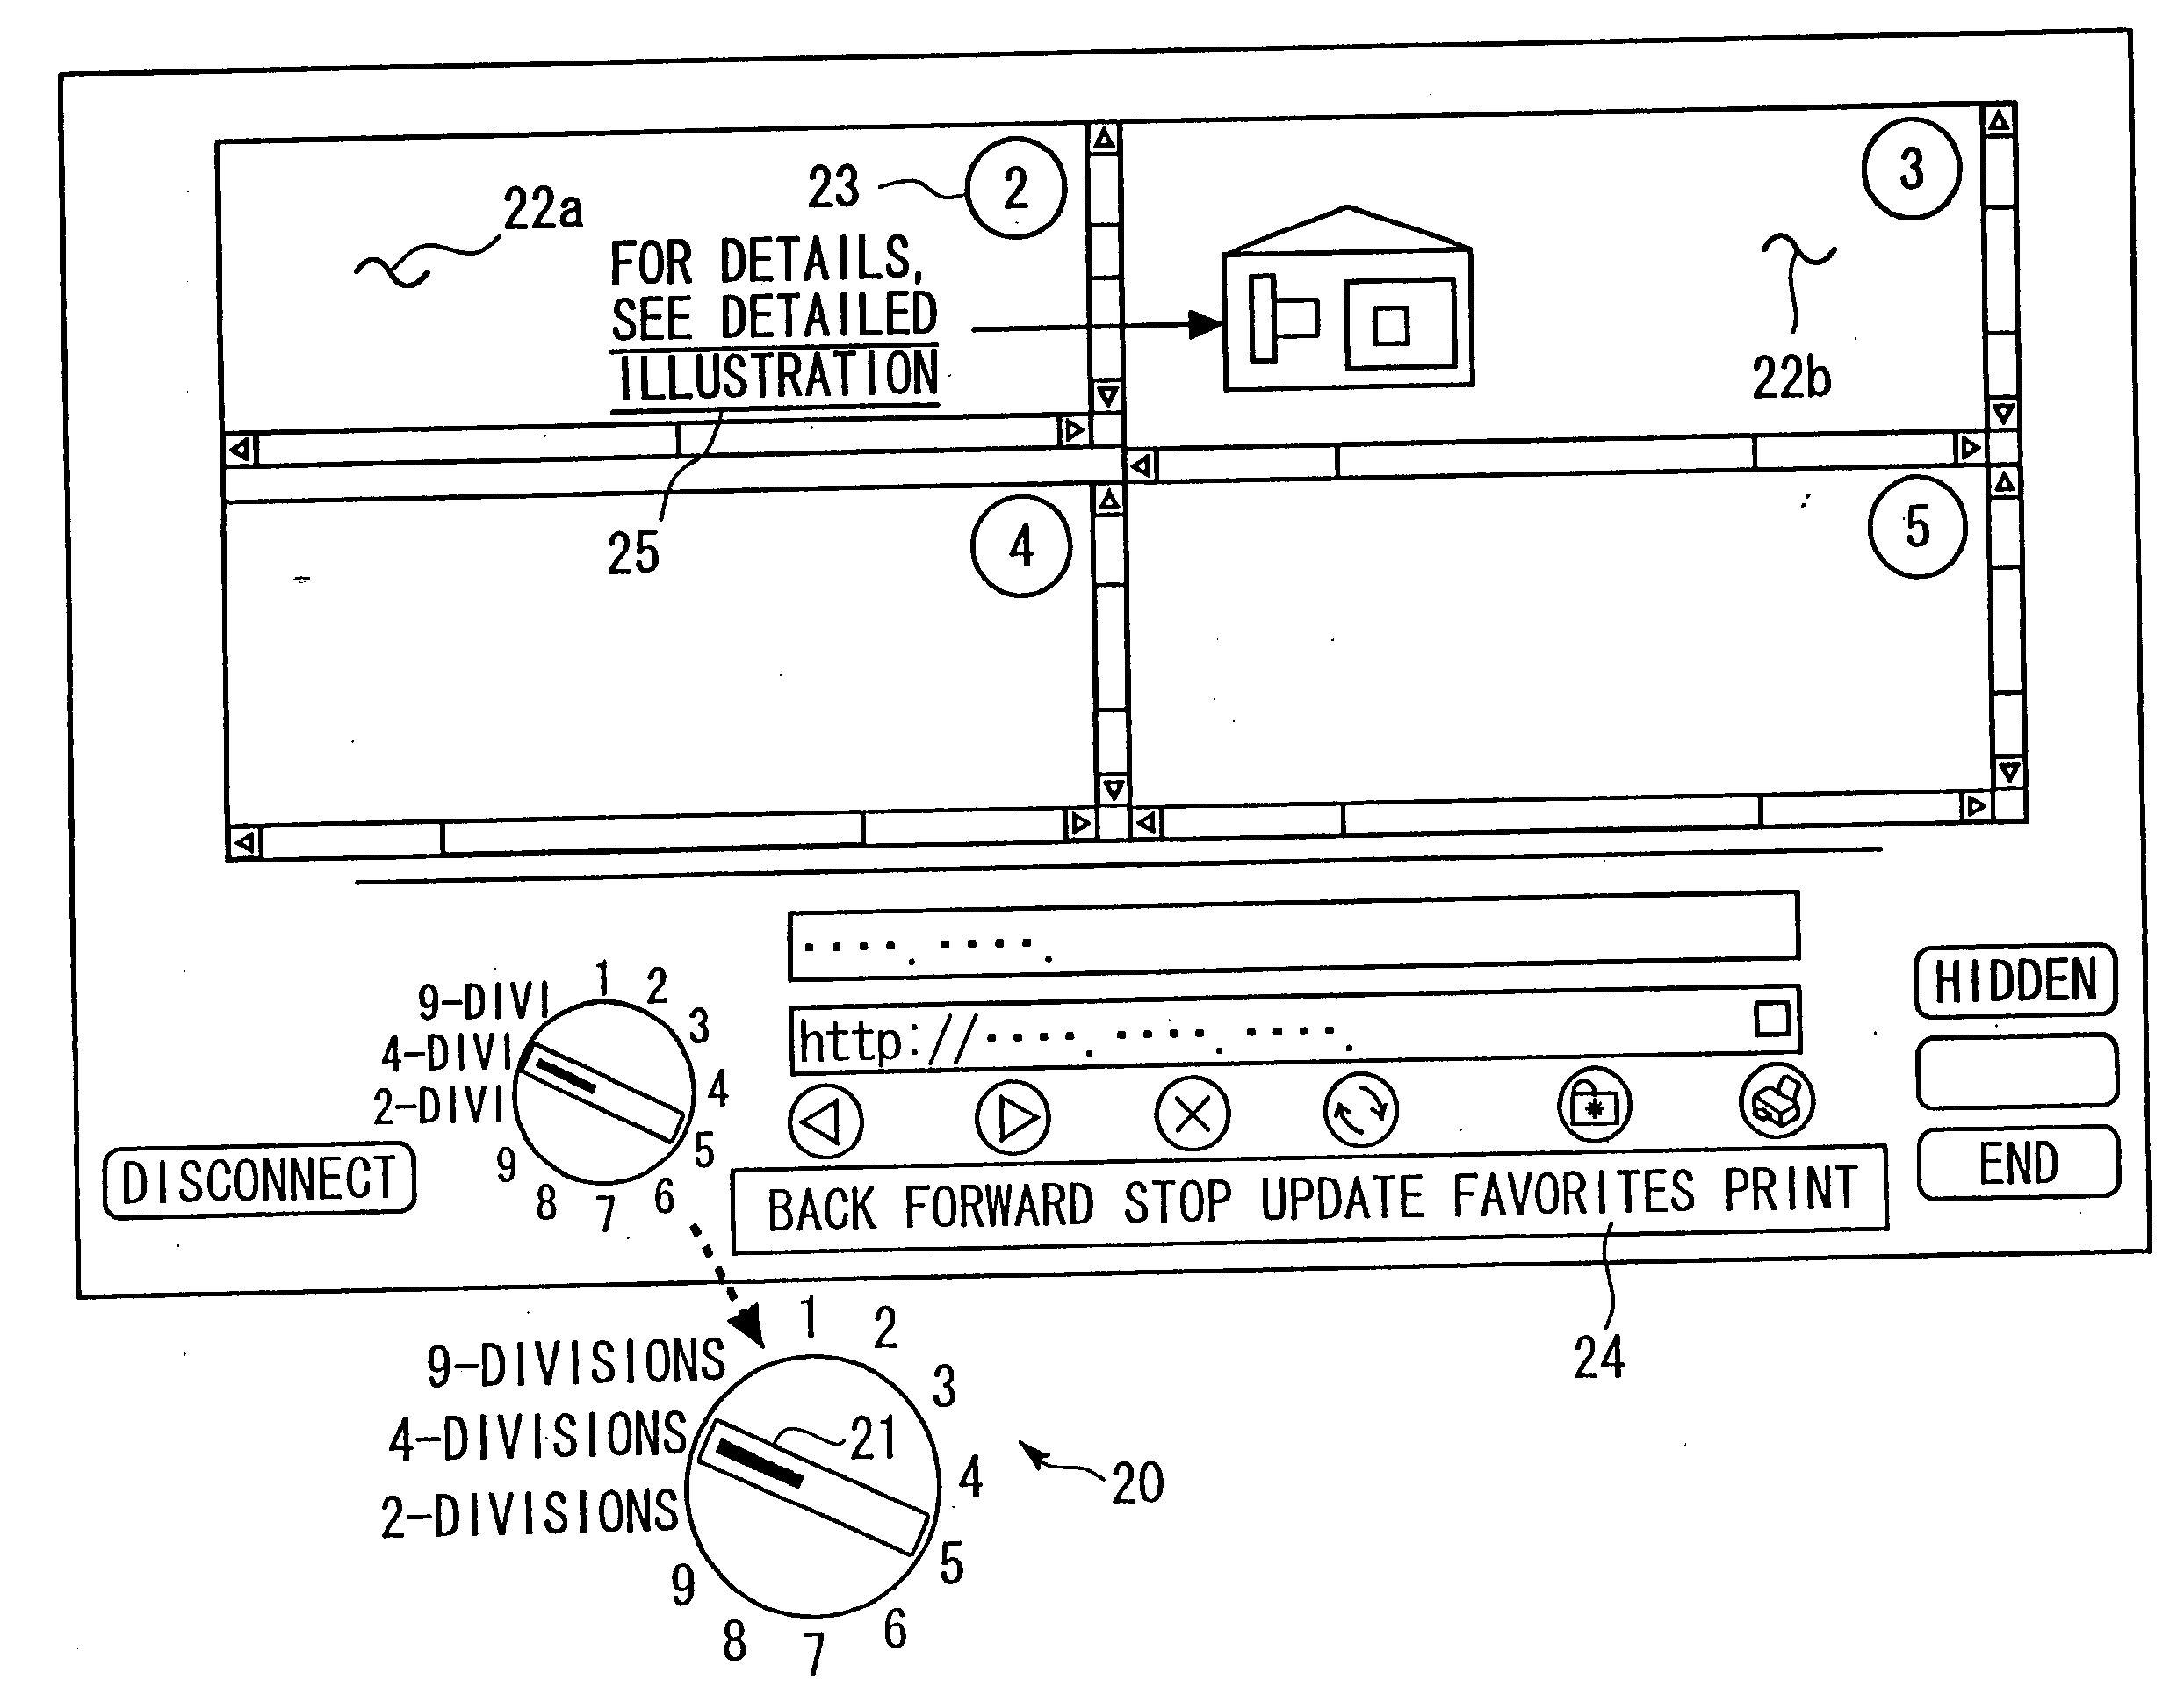 Information display system having graphical user interface switchingly controlling information display on display screen